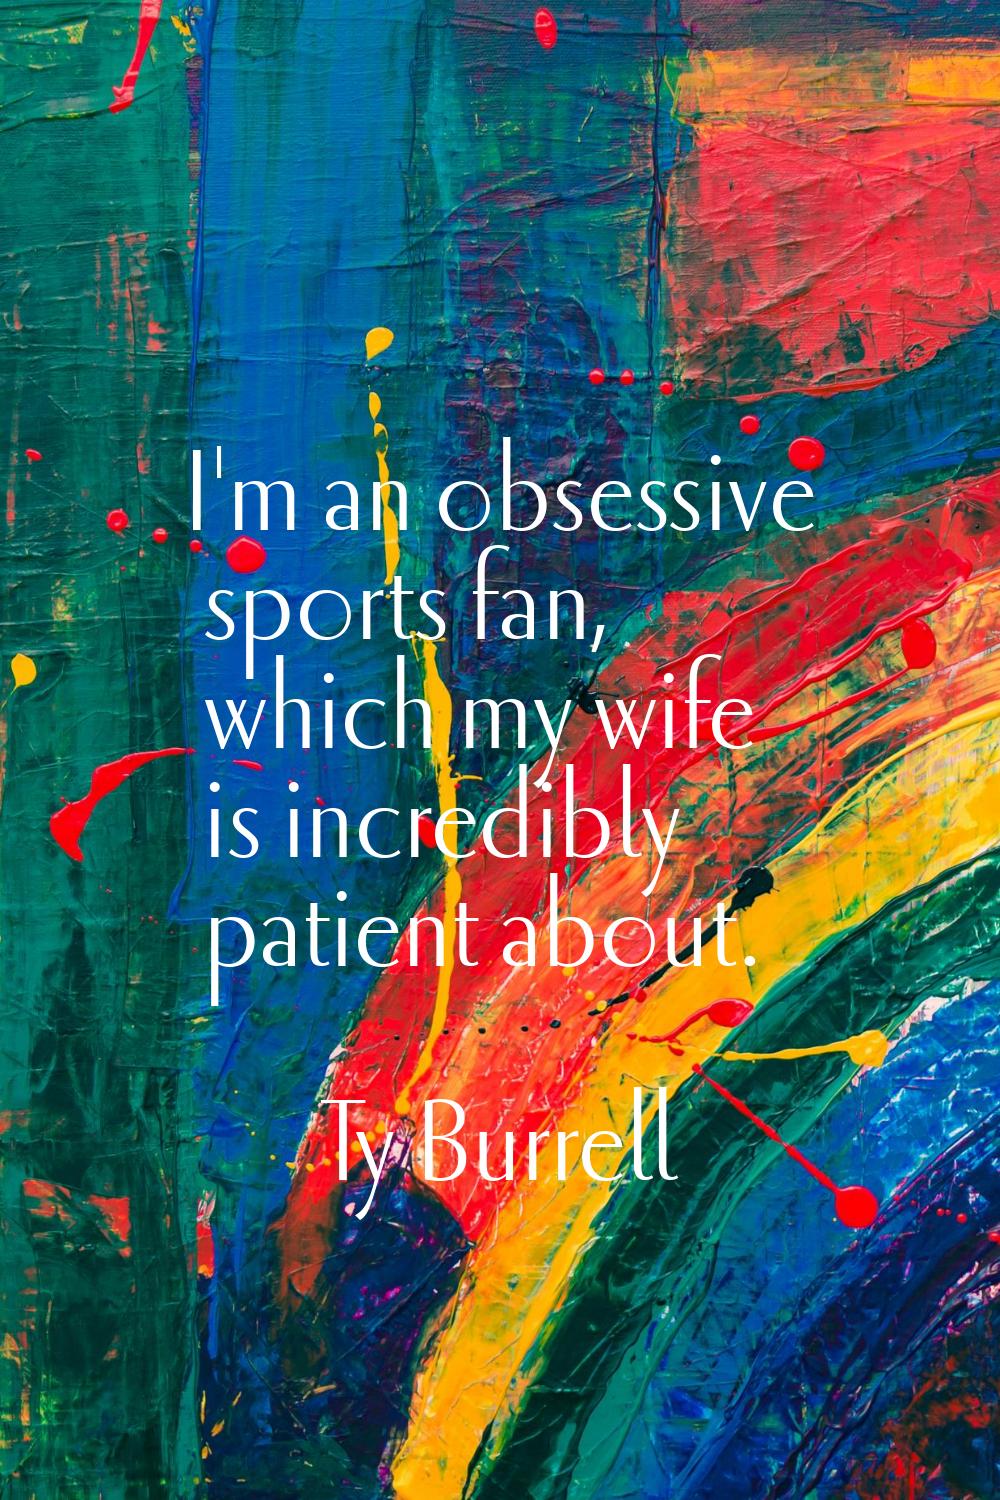 I'm an obsessive sports fan, which my wife is incredibly patient about.